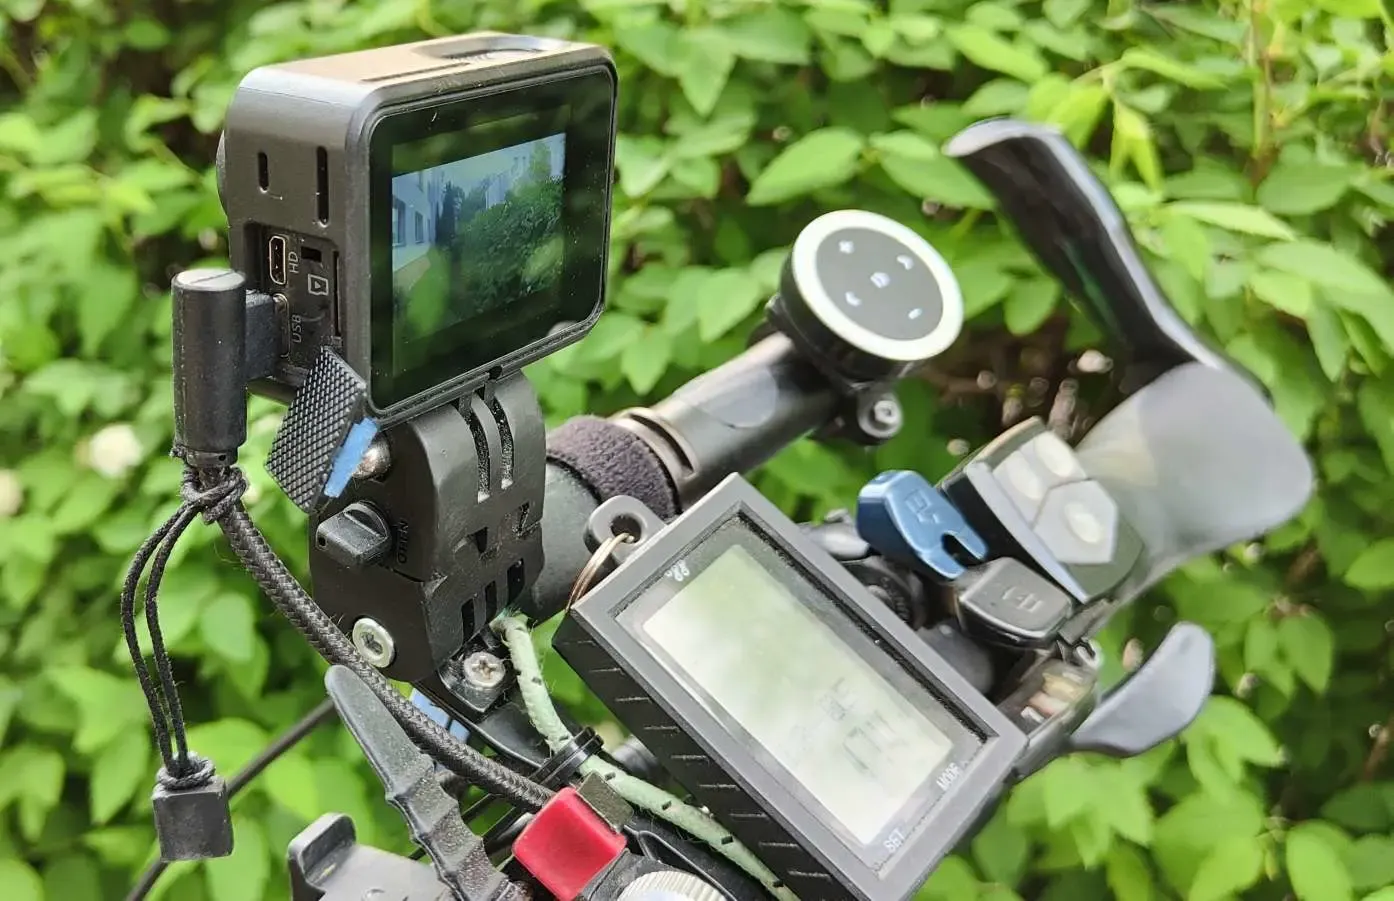 A solid mount for quick mounting of the GoPro Cam